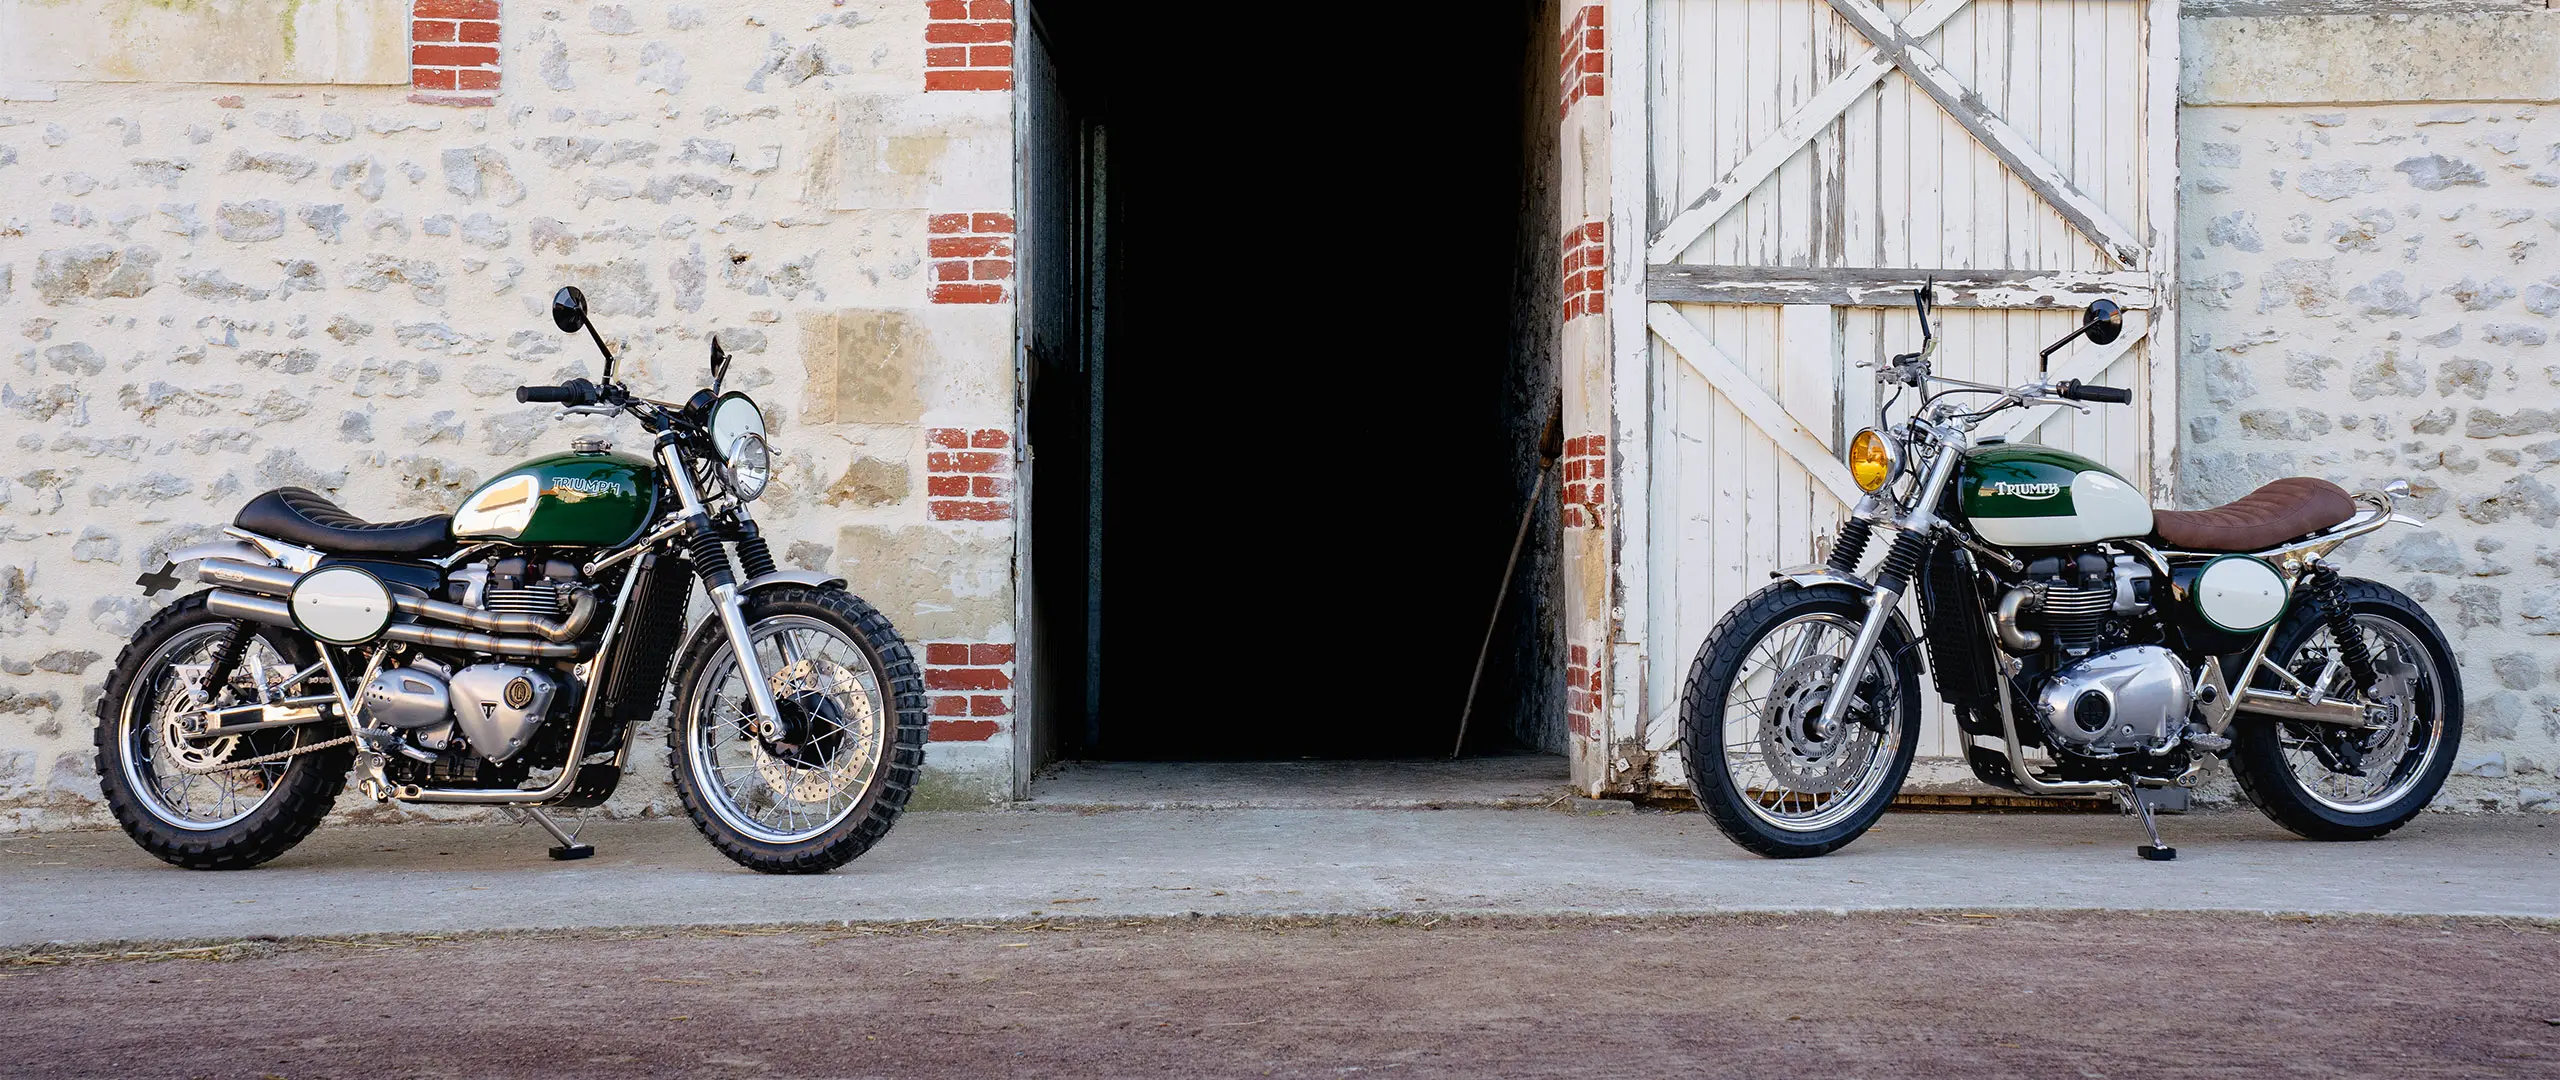 two motorcycles created by the moto preparer fcr original